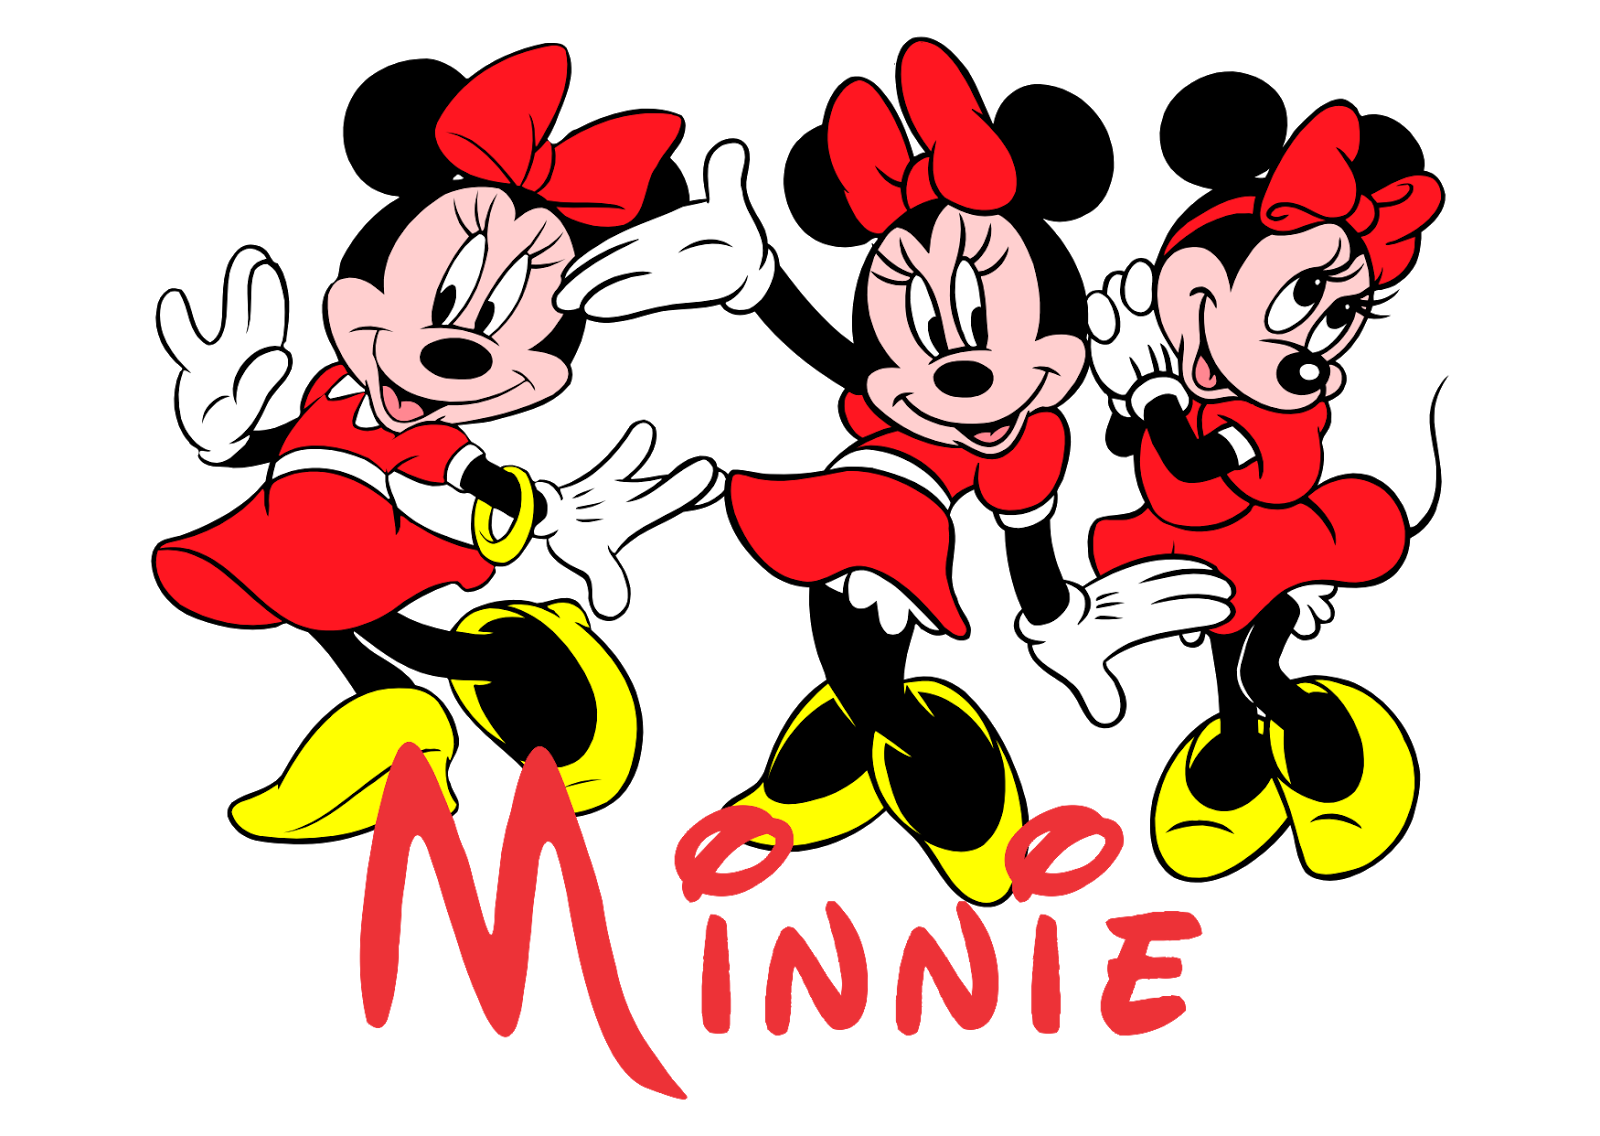 Download Minnie Logo Vector~ Format Cdr, Ai, Eps, Svg, PDF, PNG